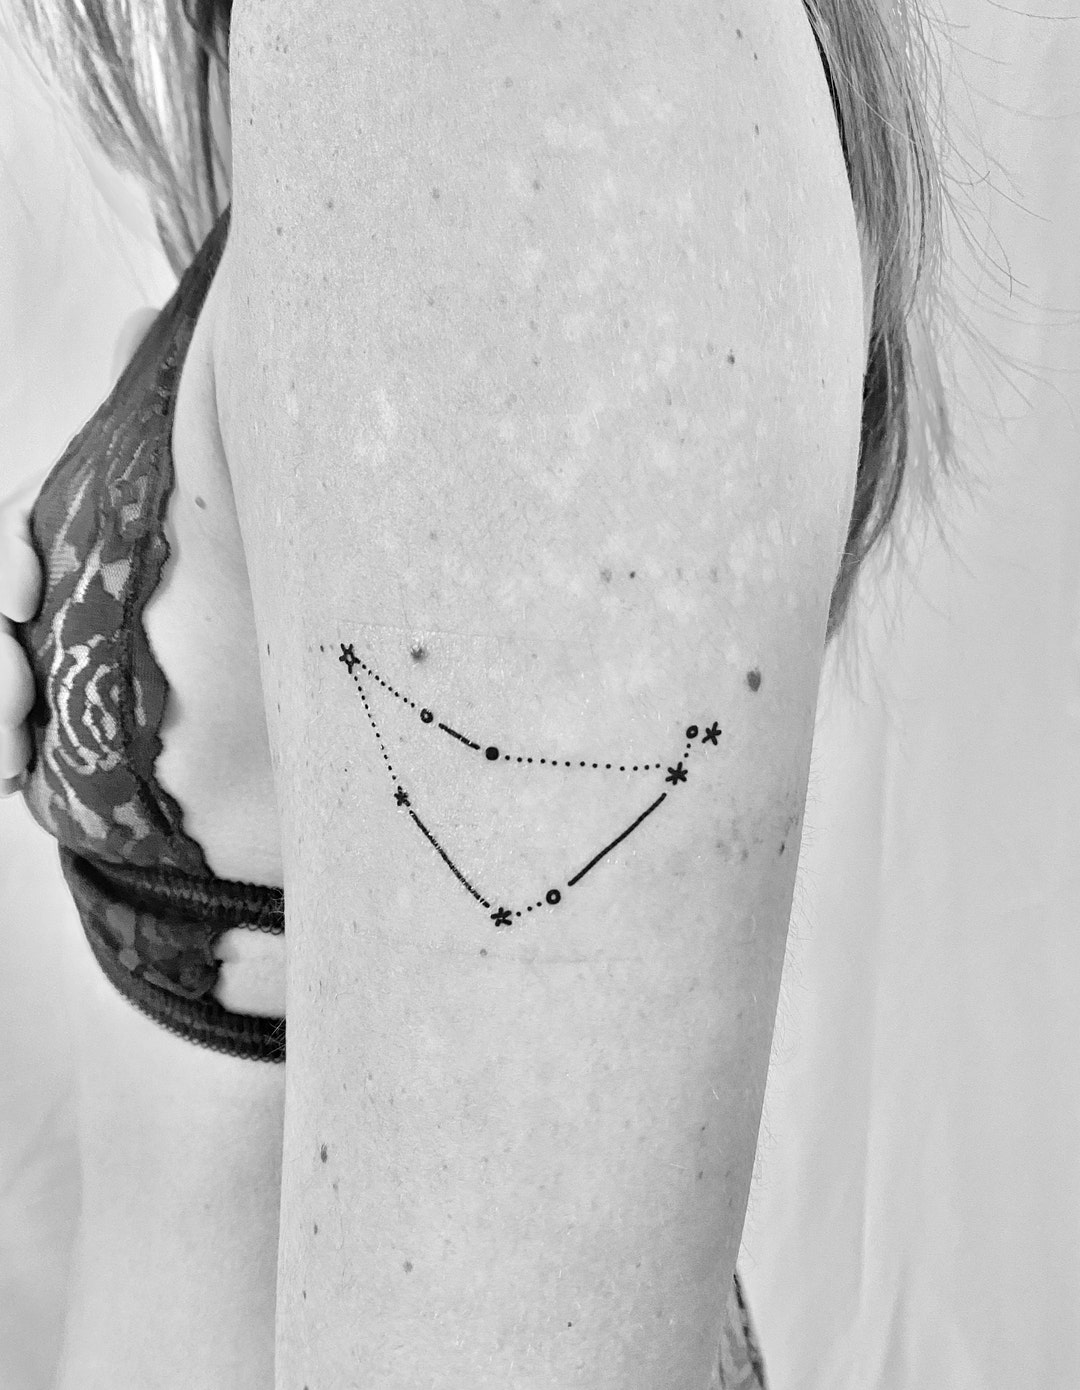 50 Zodiac Tattoos That Are Out of This World | Capricorn tattoo, Zodiac  tattoos, Small wrist tattoos